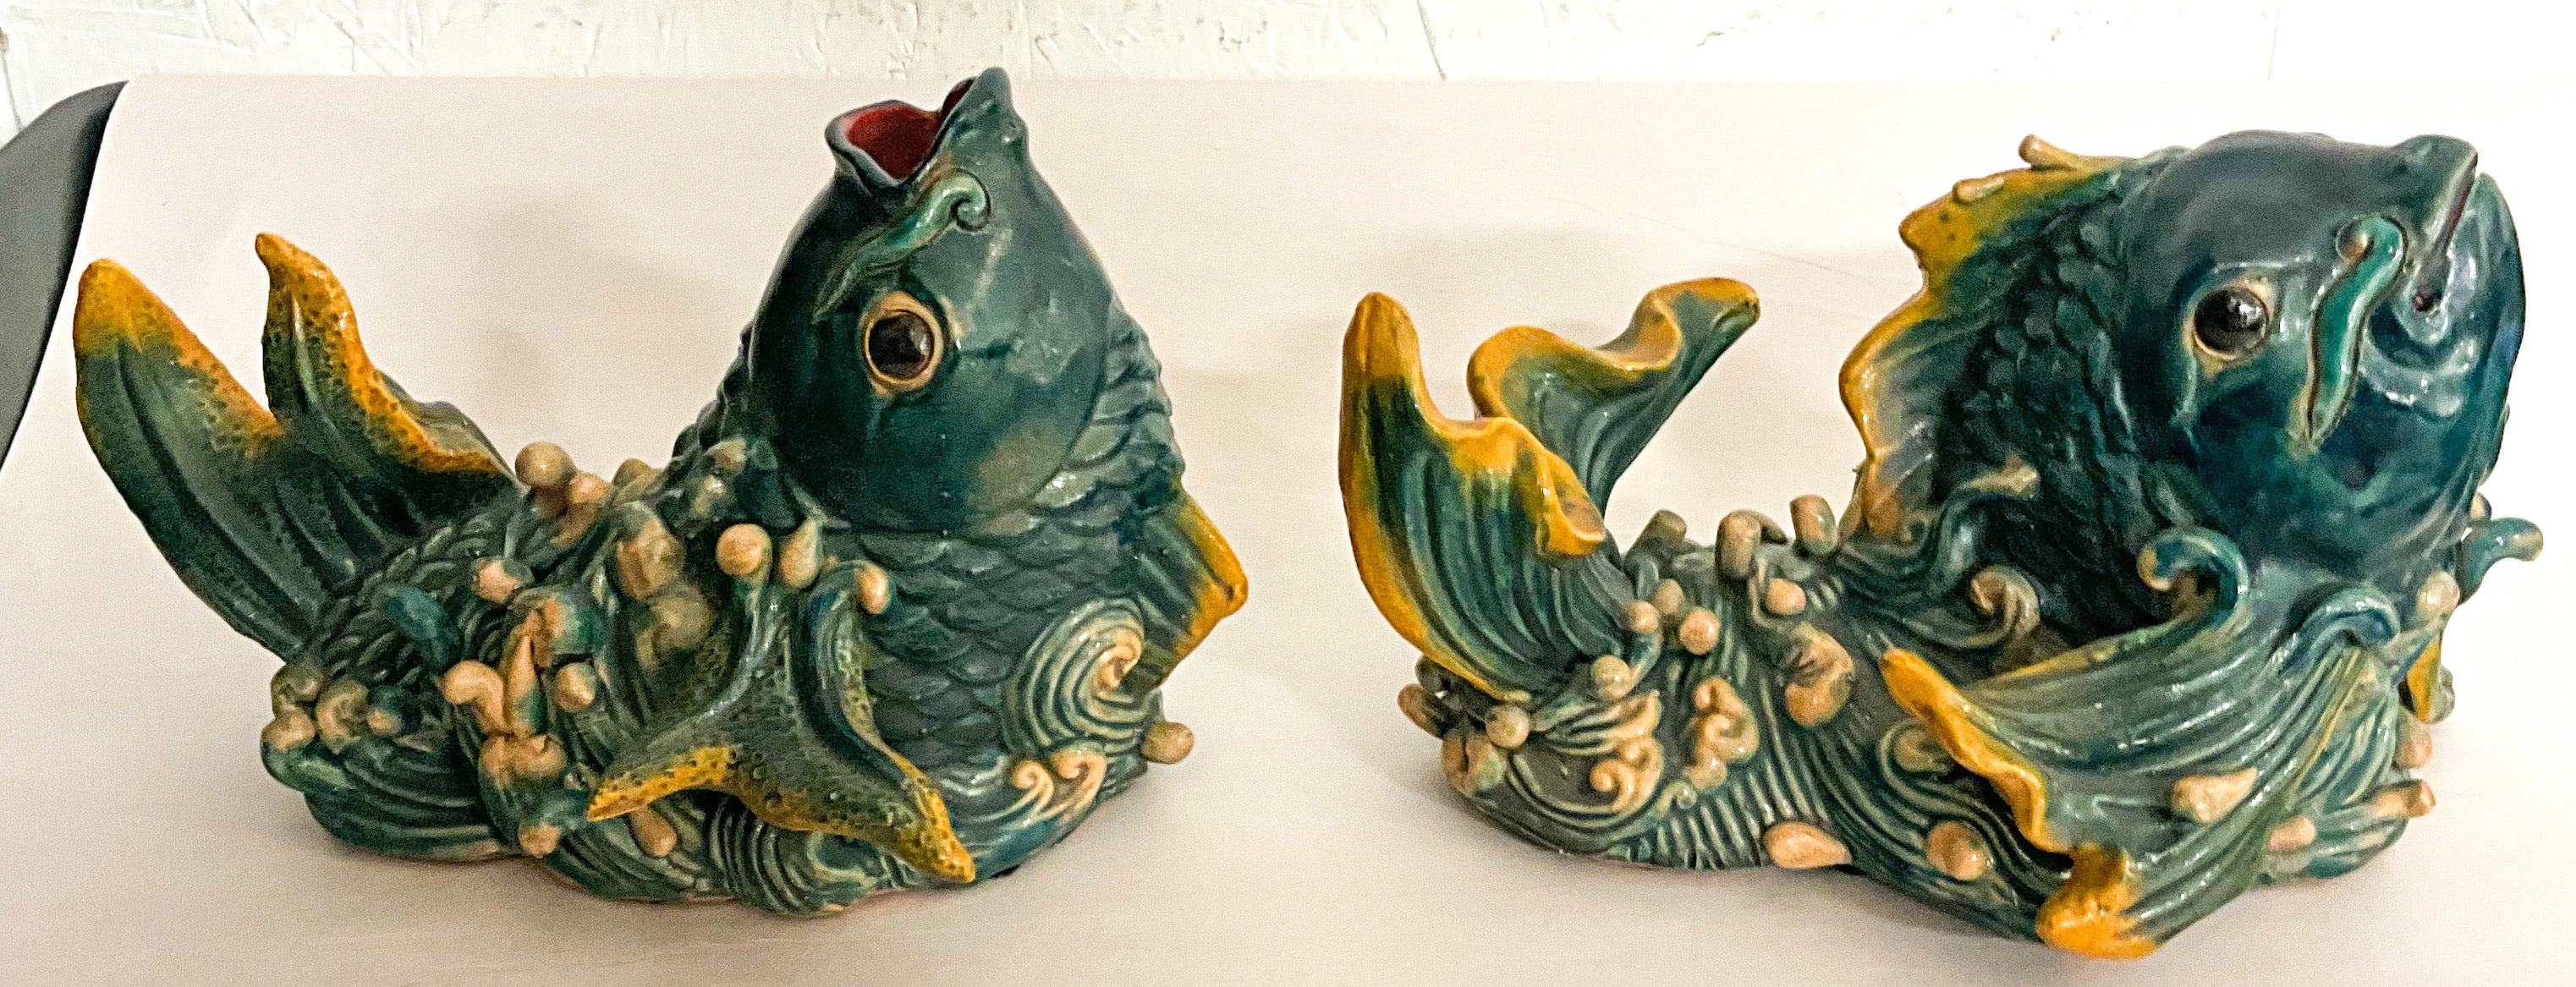 This is a pair of Chinese Export style decorative terracotta fish. They are a deep blue-green paint with gold accents. The are hand painted and in very good condition.